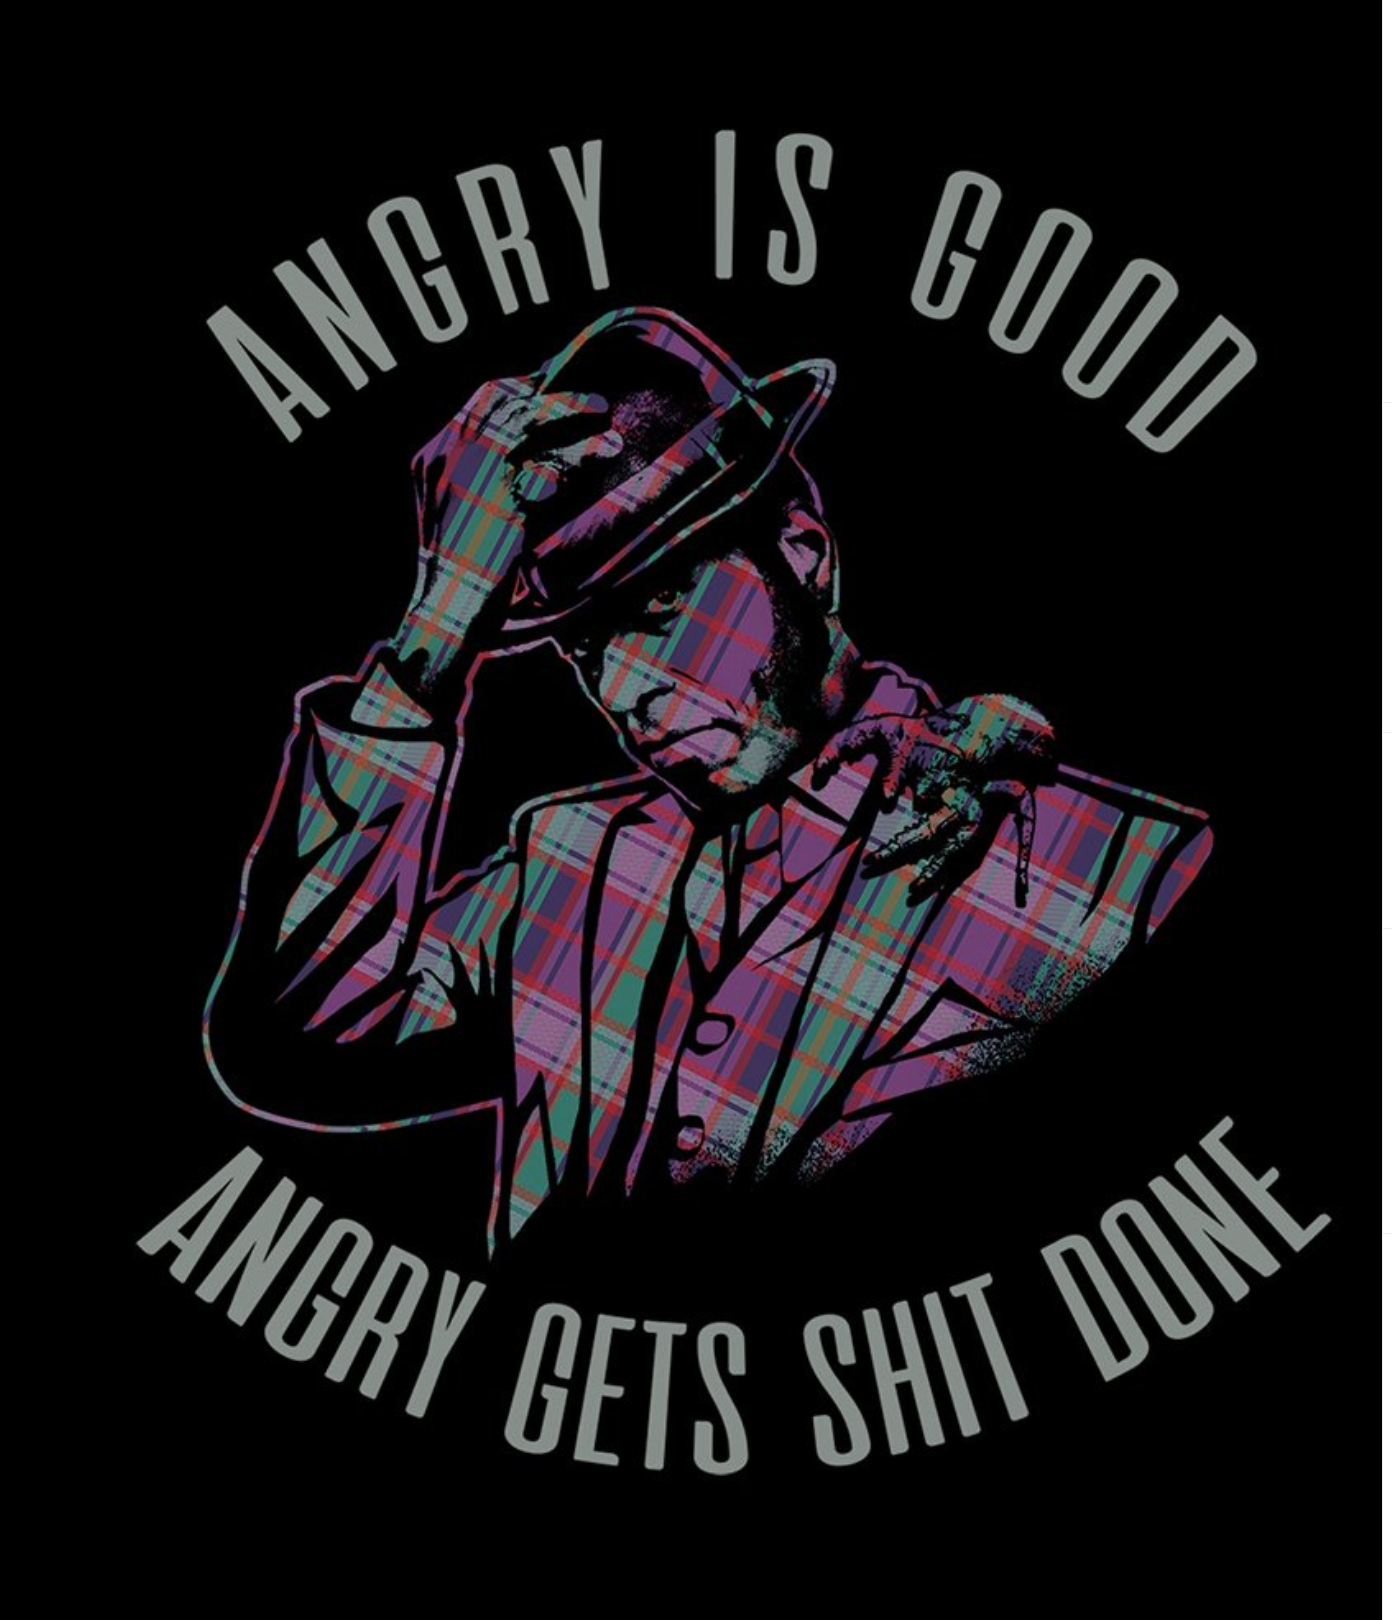 Mr Nancy from American Gods with text "Angry is good. Angry get shit done"